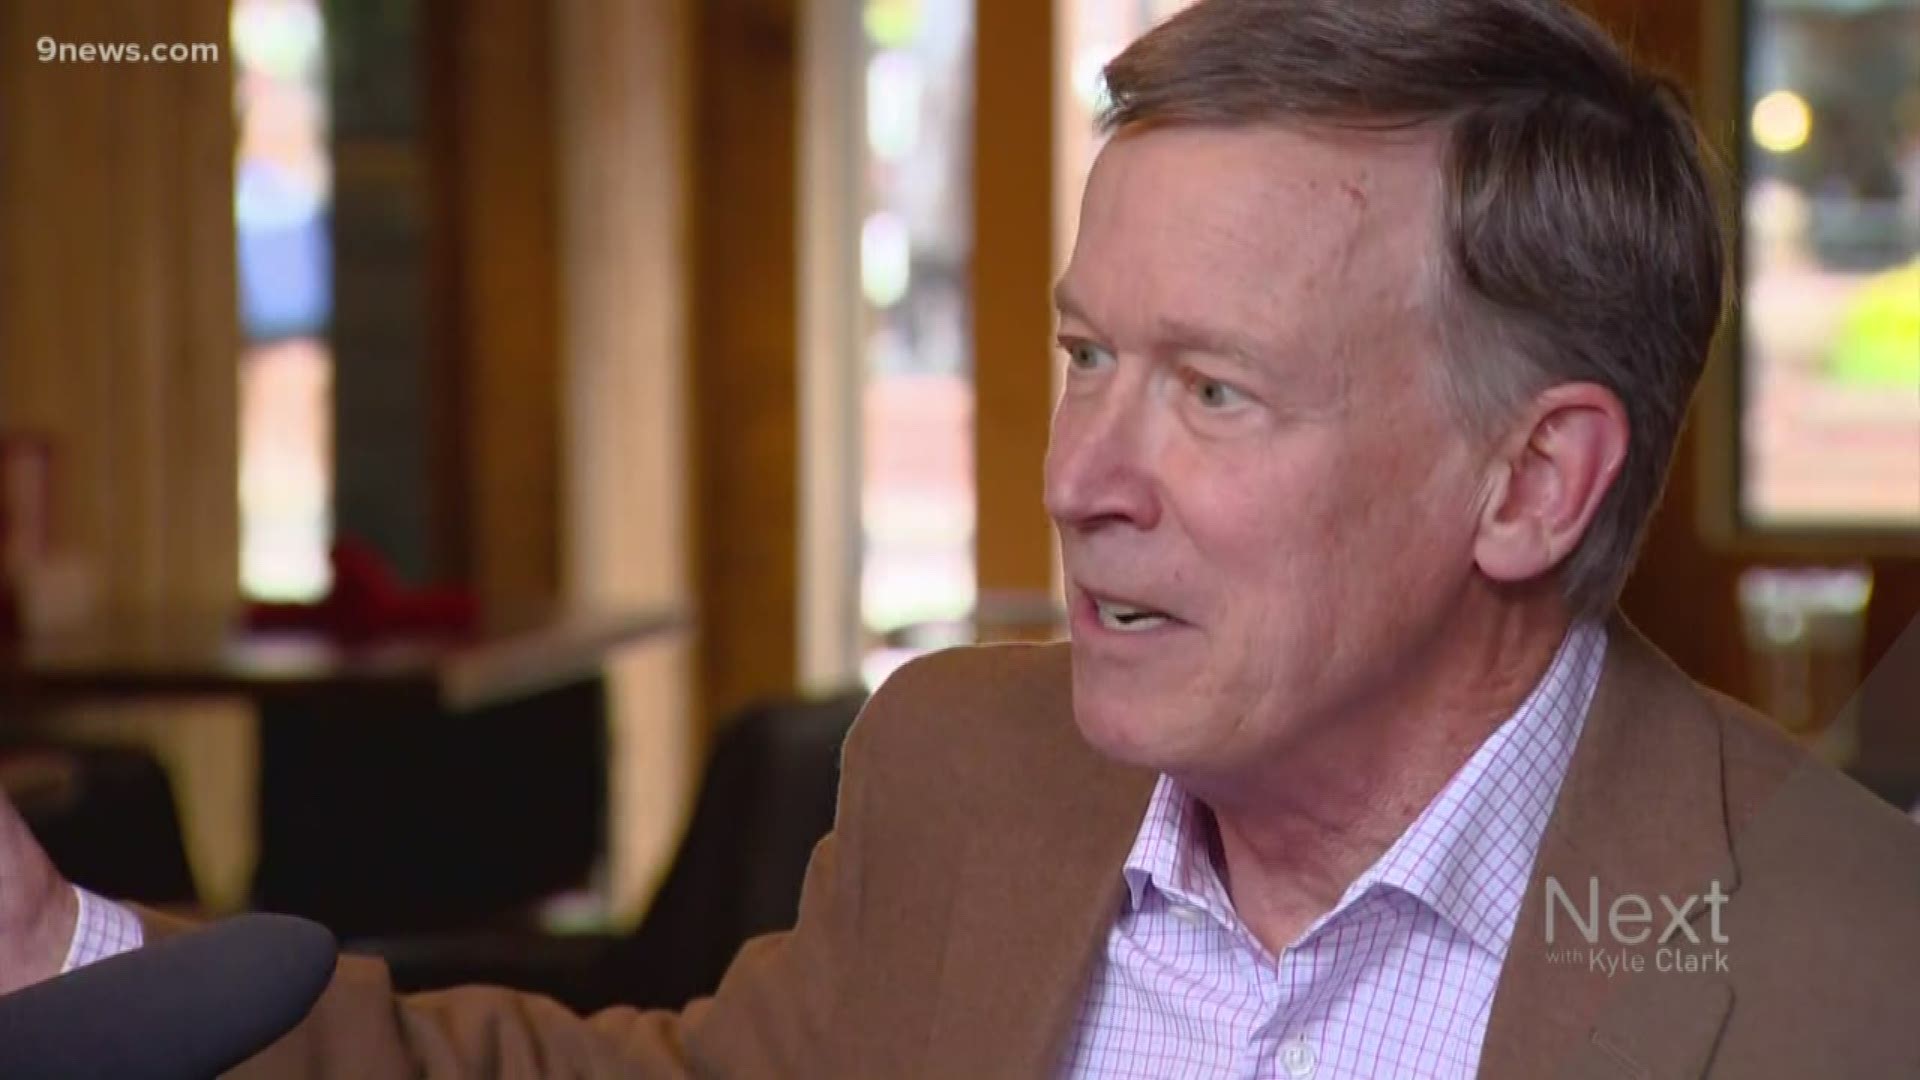 Fresh off his failed presidential campaign, former Governor John Hickenlooper is getting into the Democratic Senate primary. He joins a crowded group of other candidates hoping to challenge Republican Senator Cory Gardner.